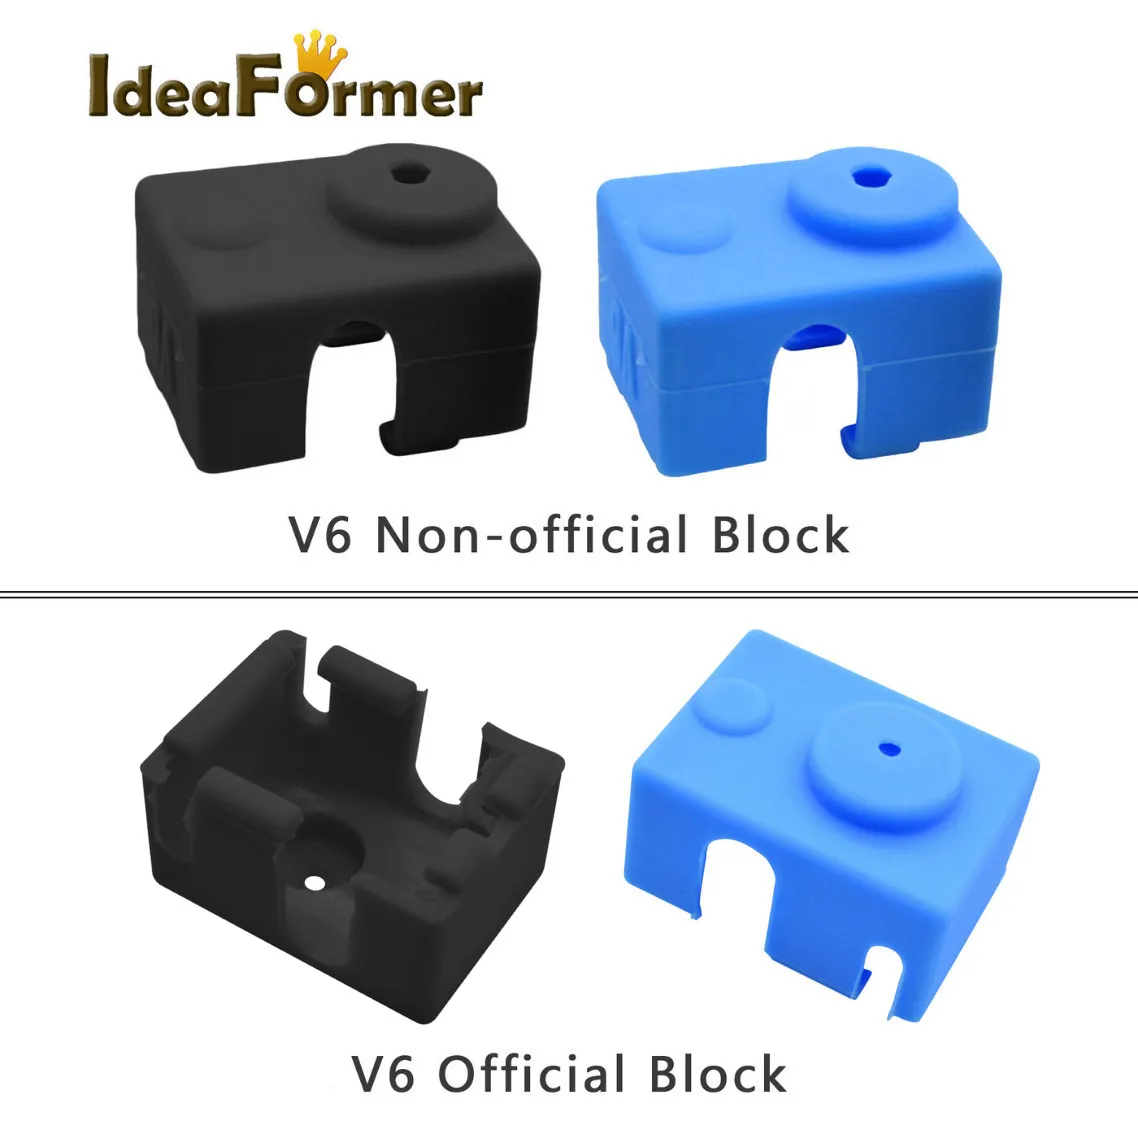 3D printer Heat block/silicone sleeve/heat block+silicone cover combination set. 